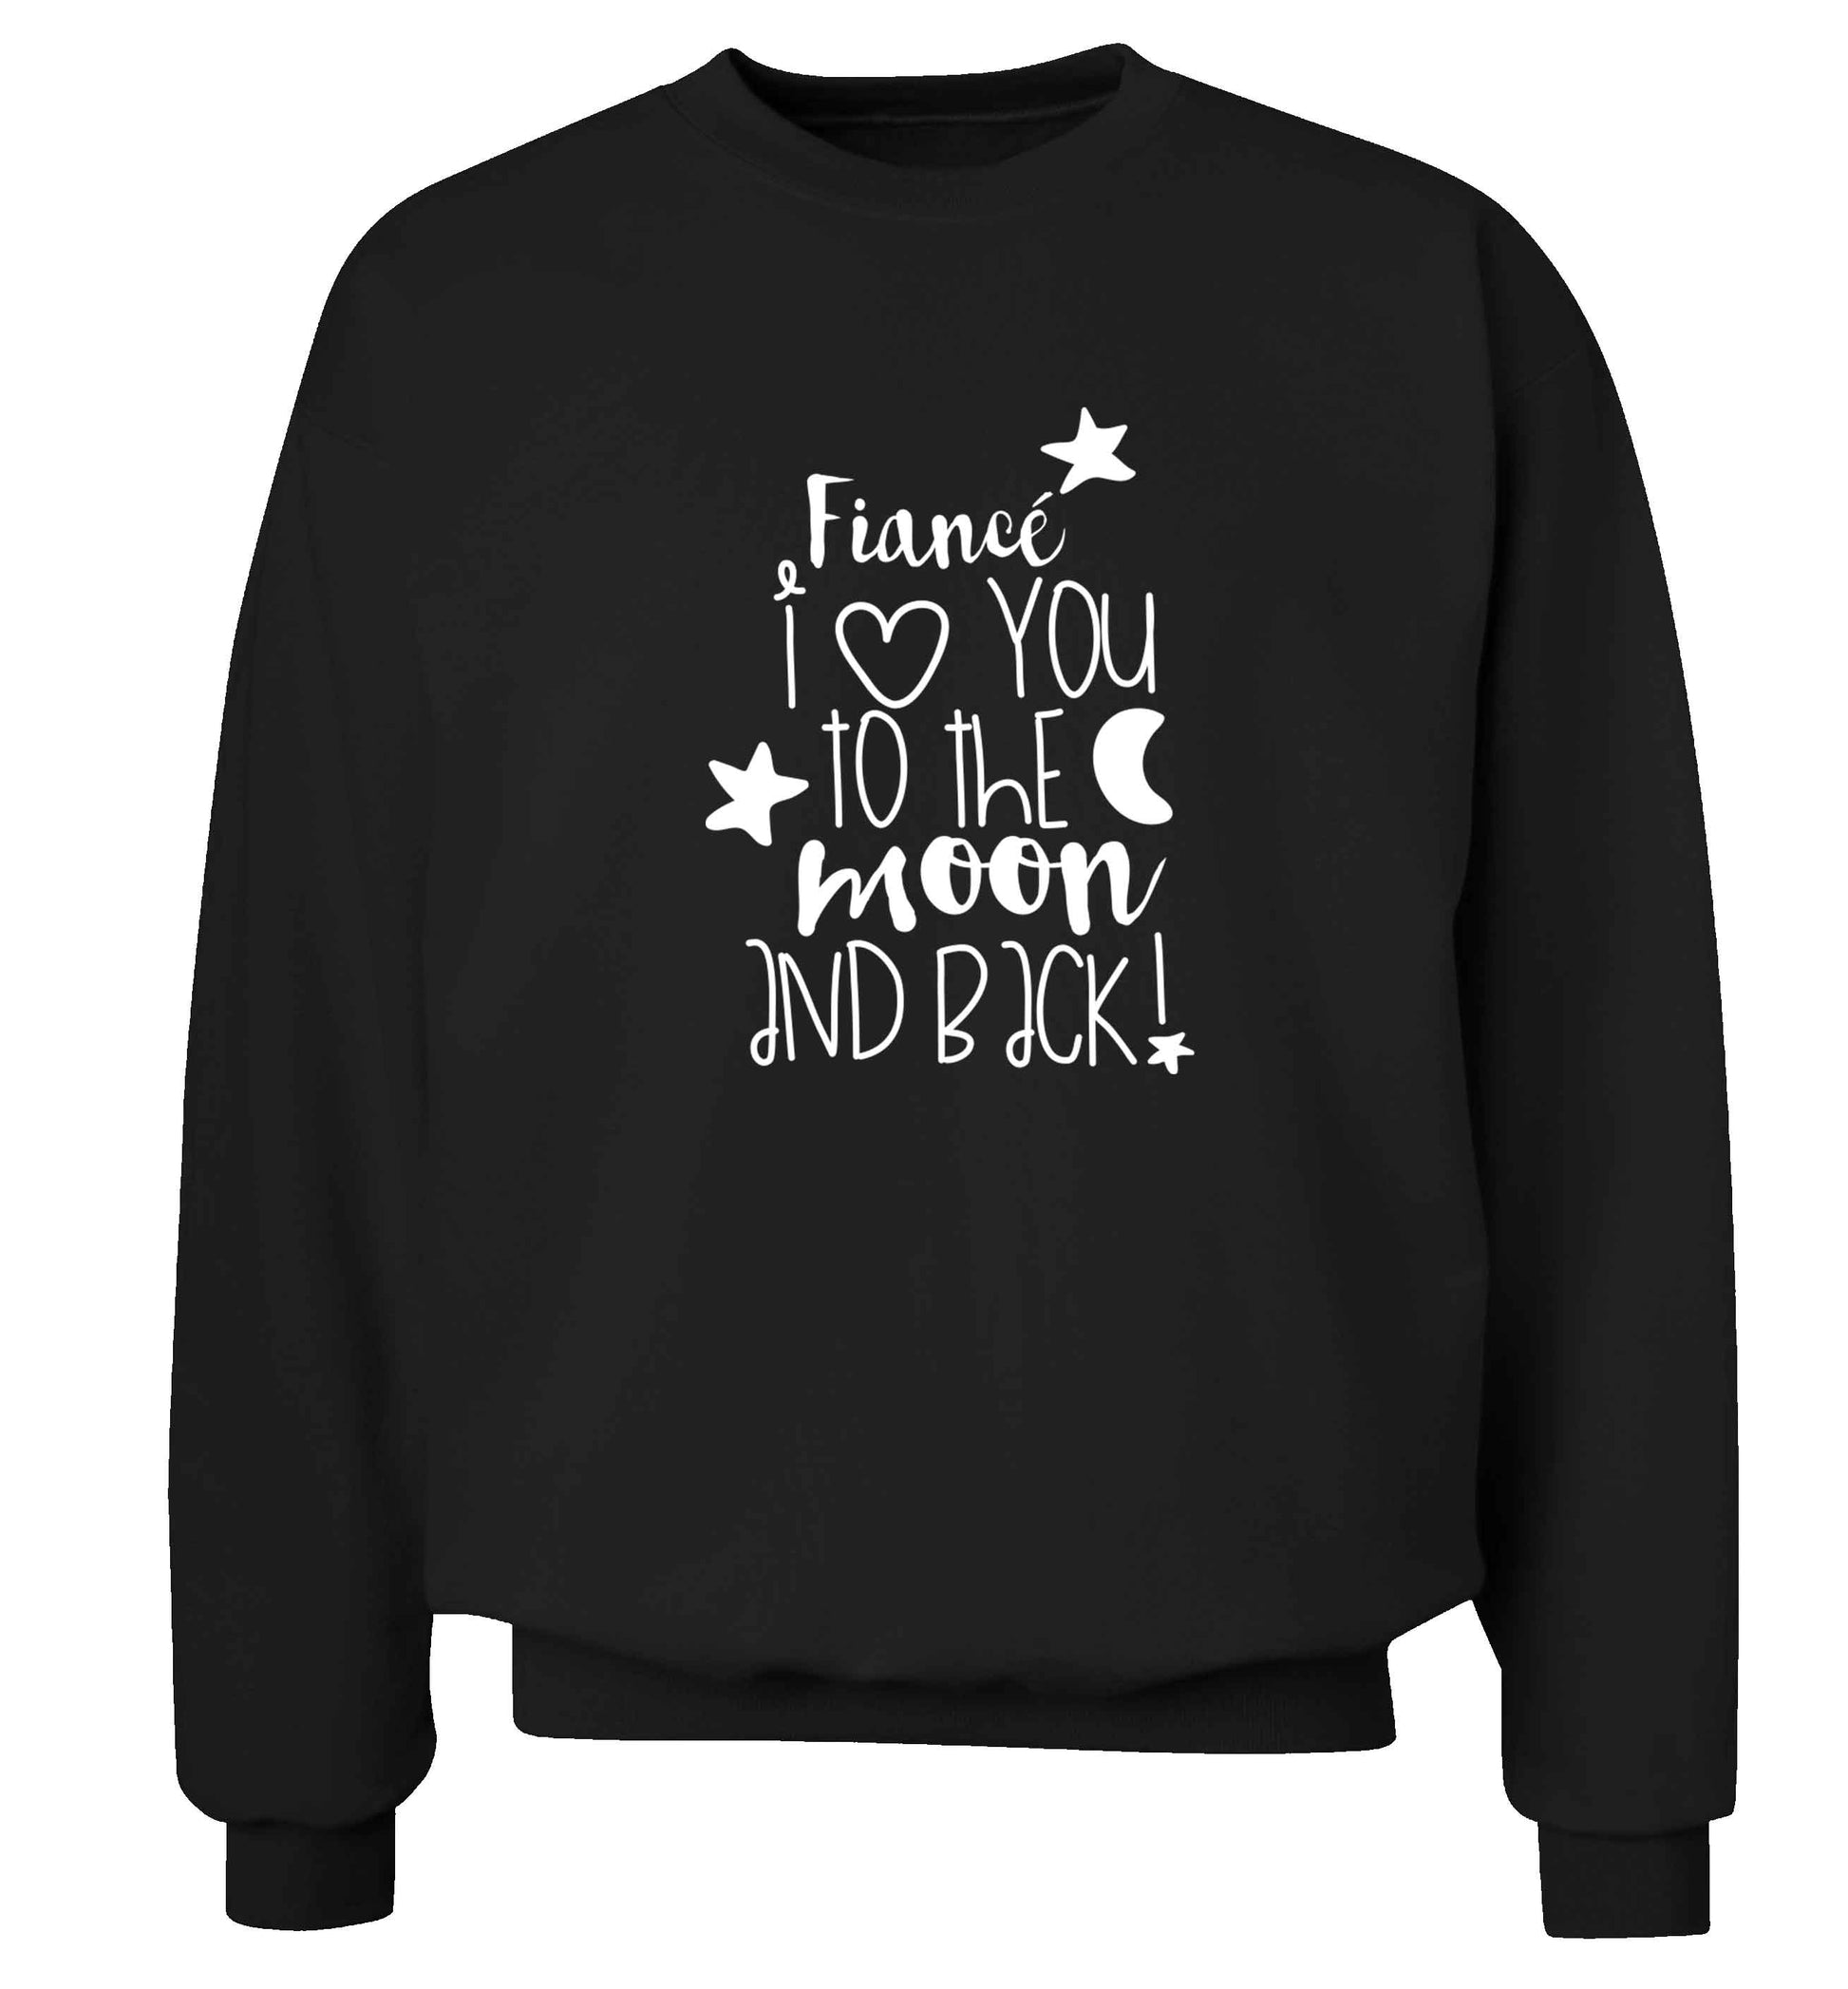 Fiancé I love you to the moon and back adult's unisex black sweater 2XL